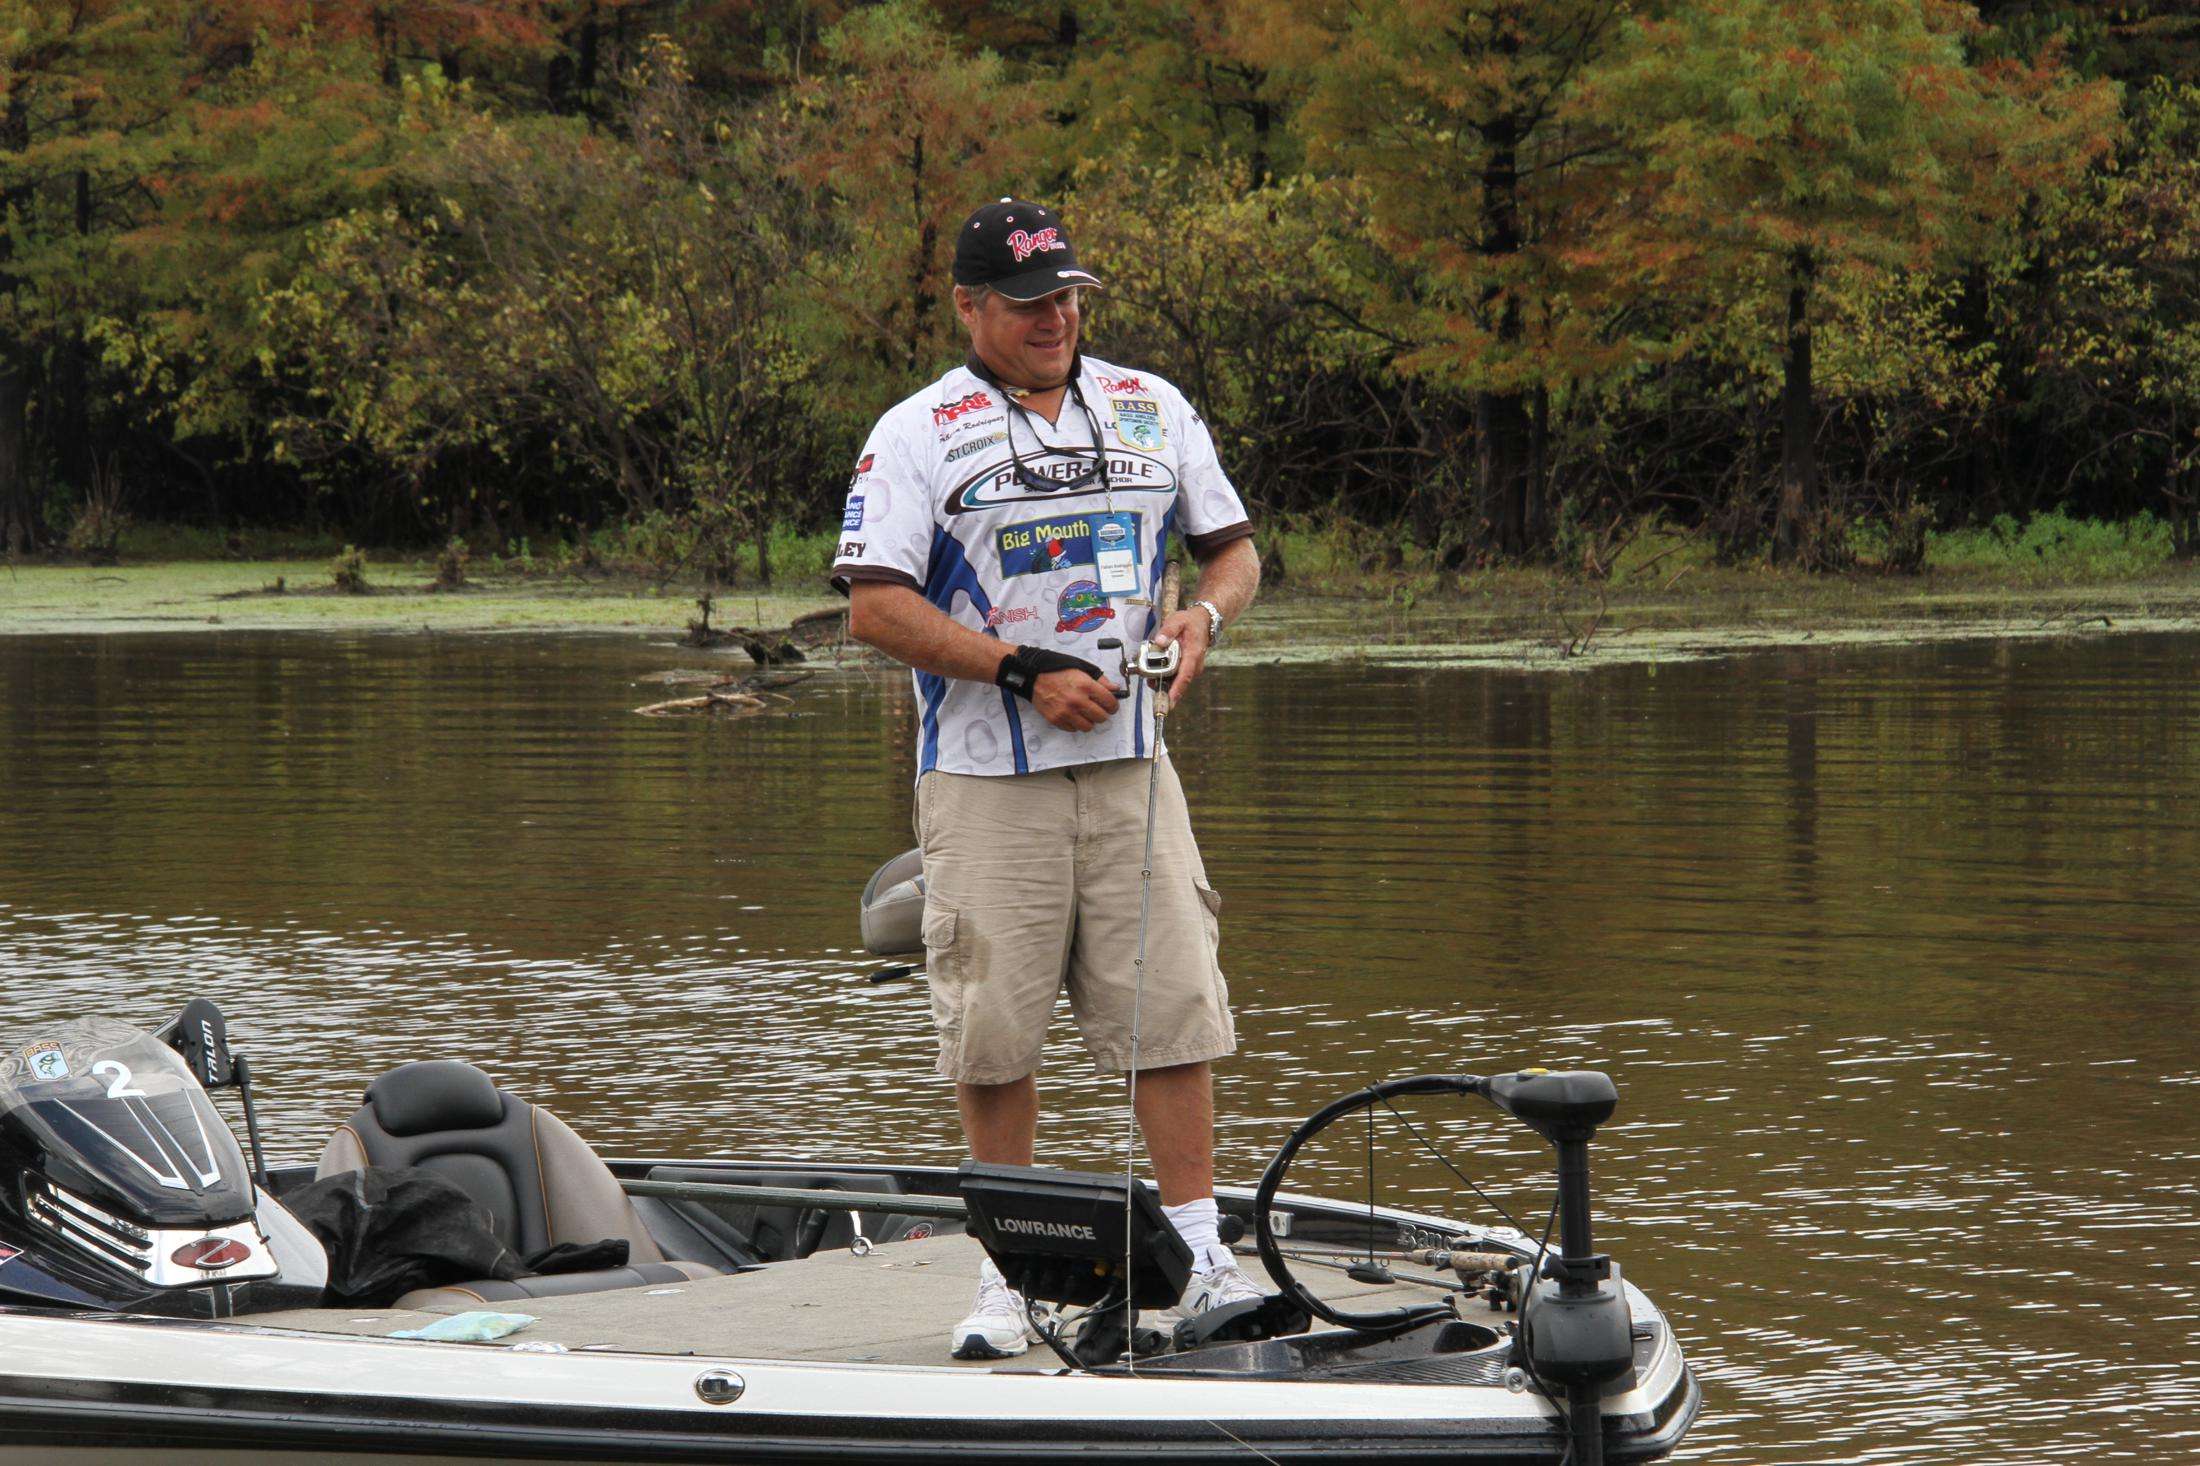 With our three boats within easy talking distance, a clearly emotional Rodriguez shares the story in detail. He felt the right thing to do was share the spot at that moment. 